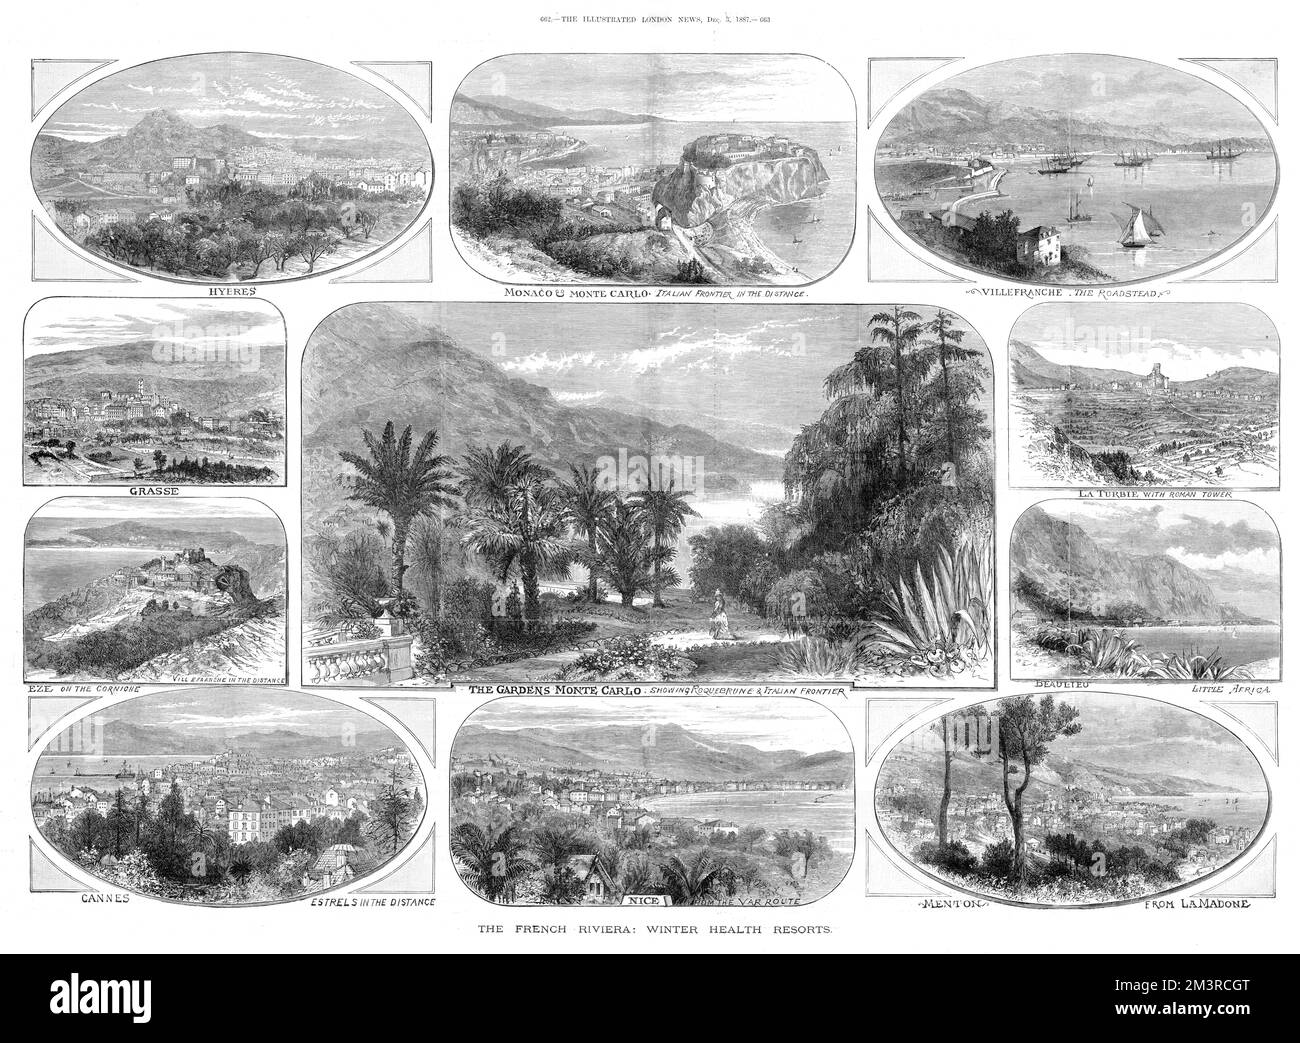 Double page spread from the Illustrated London News showing views of the various towns on the French Riviera, which are described as 'winter health resorts' - a good example of how the area grew in popularity with British visitors during the 19th century.    1887 Stock Photo